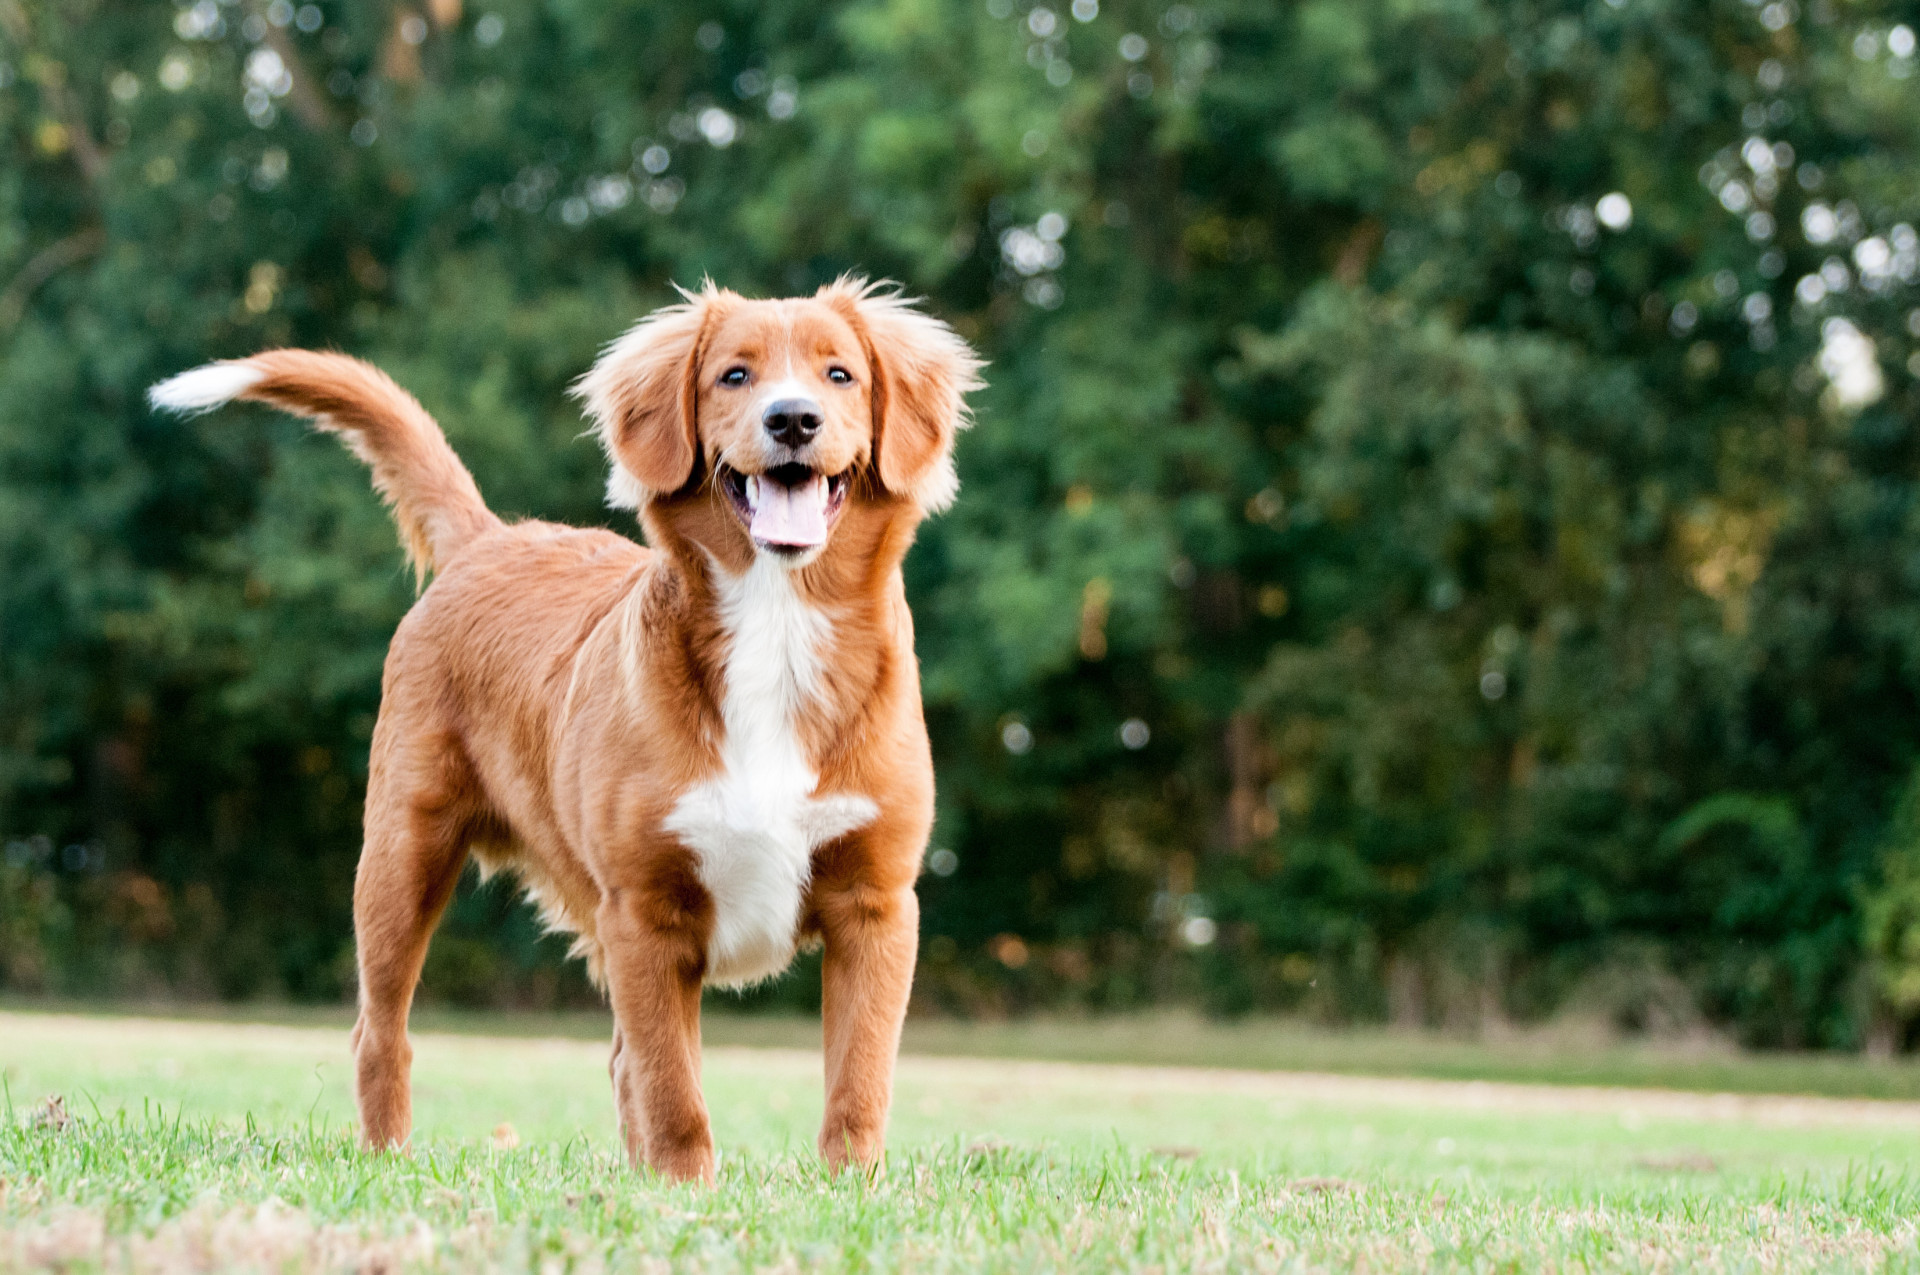 These breeds make the best family dogs